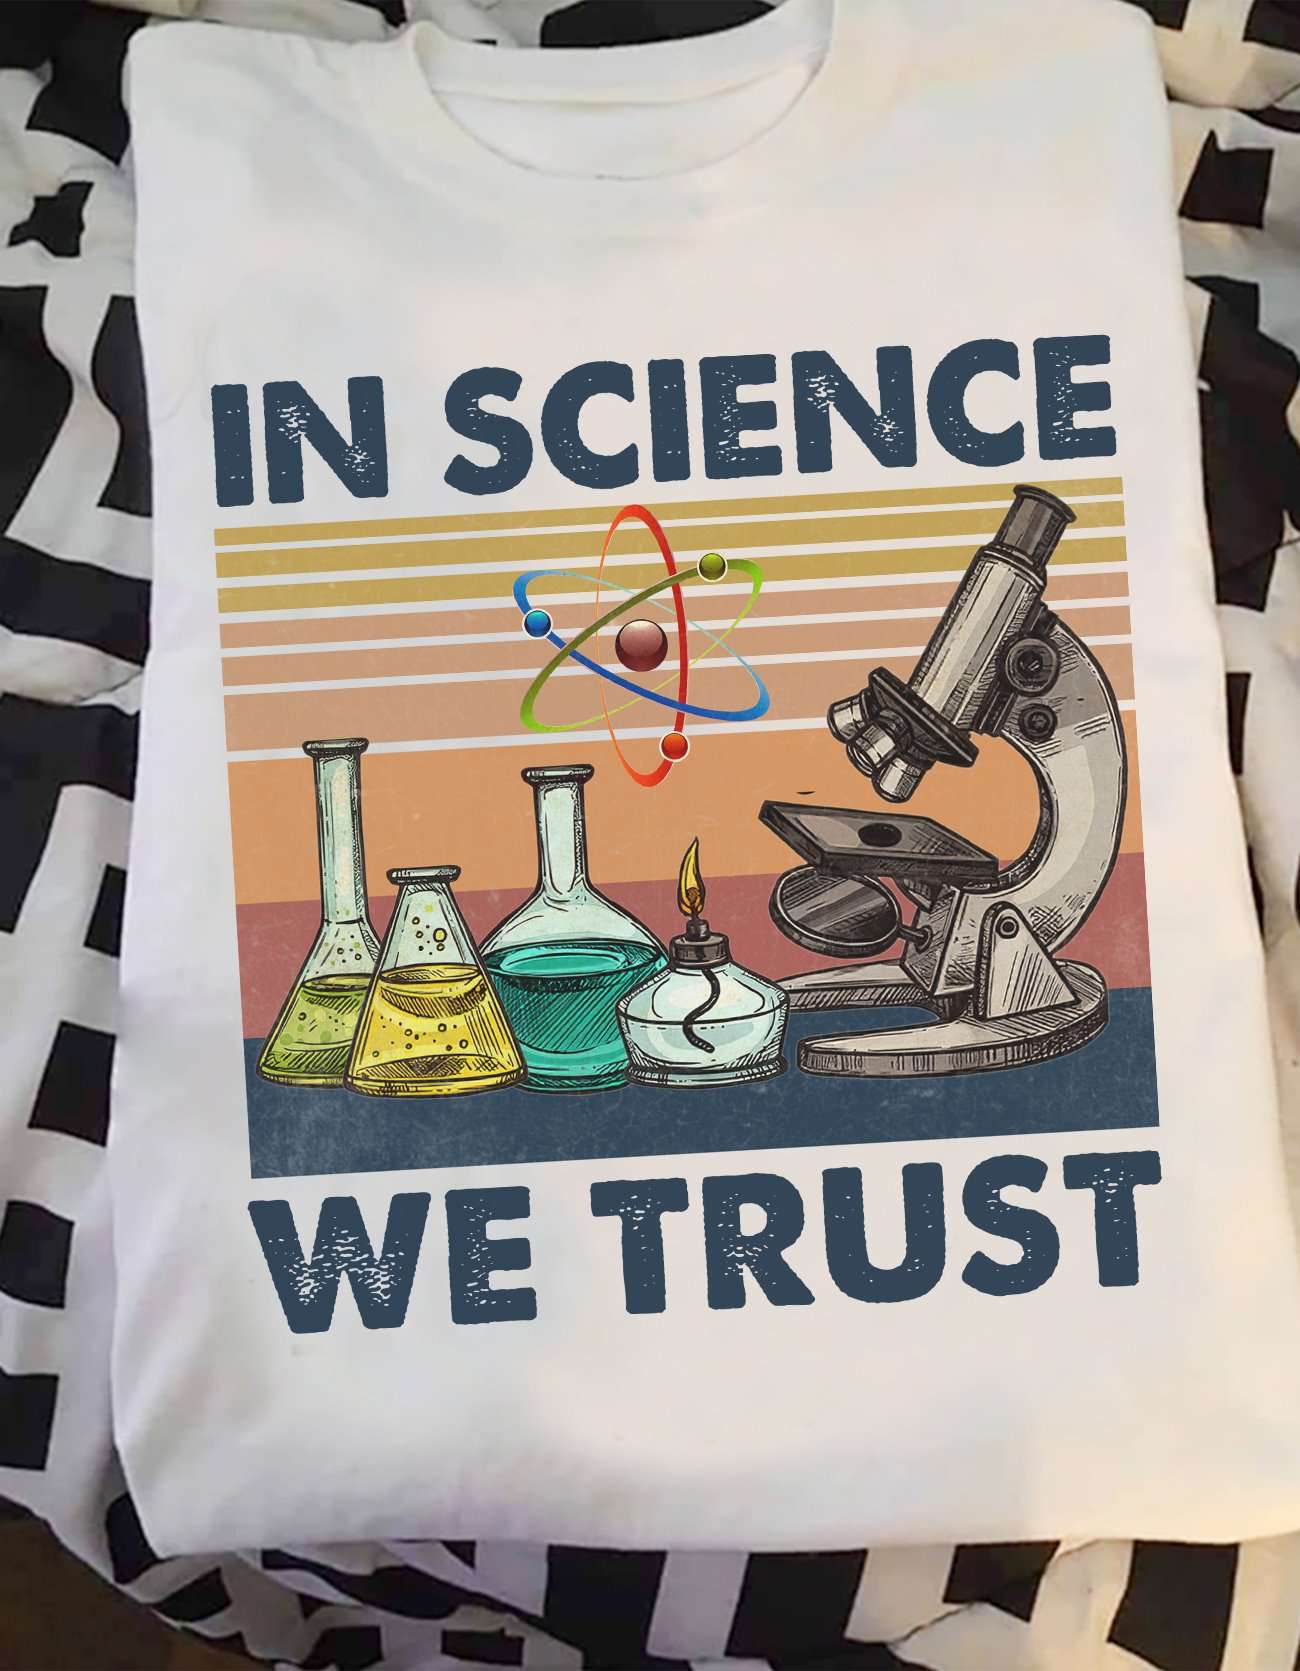 In science we trust - Science lover T-shirt, Science lab